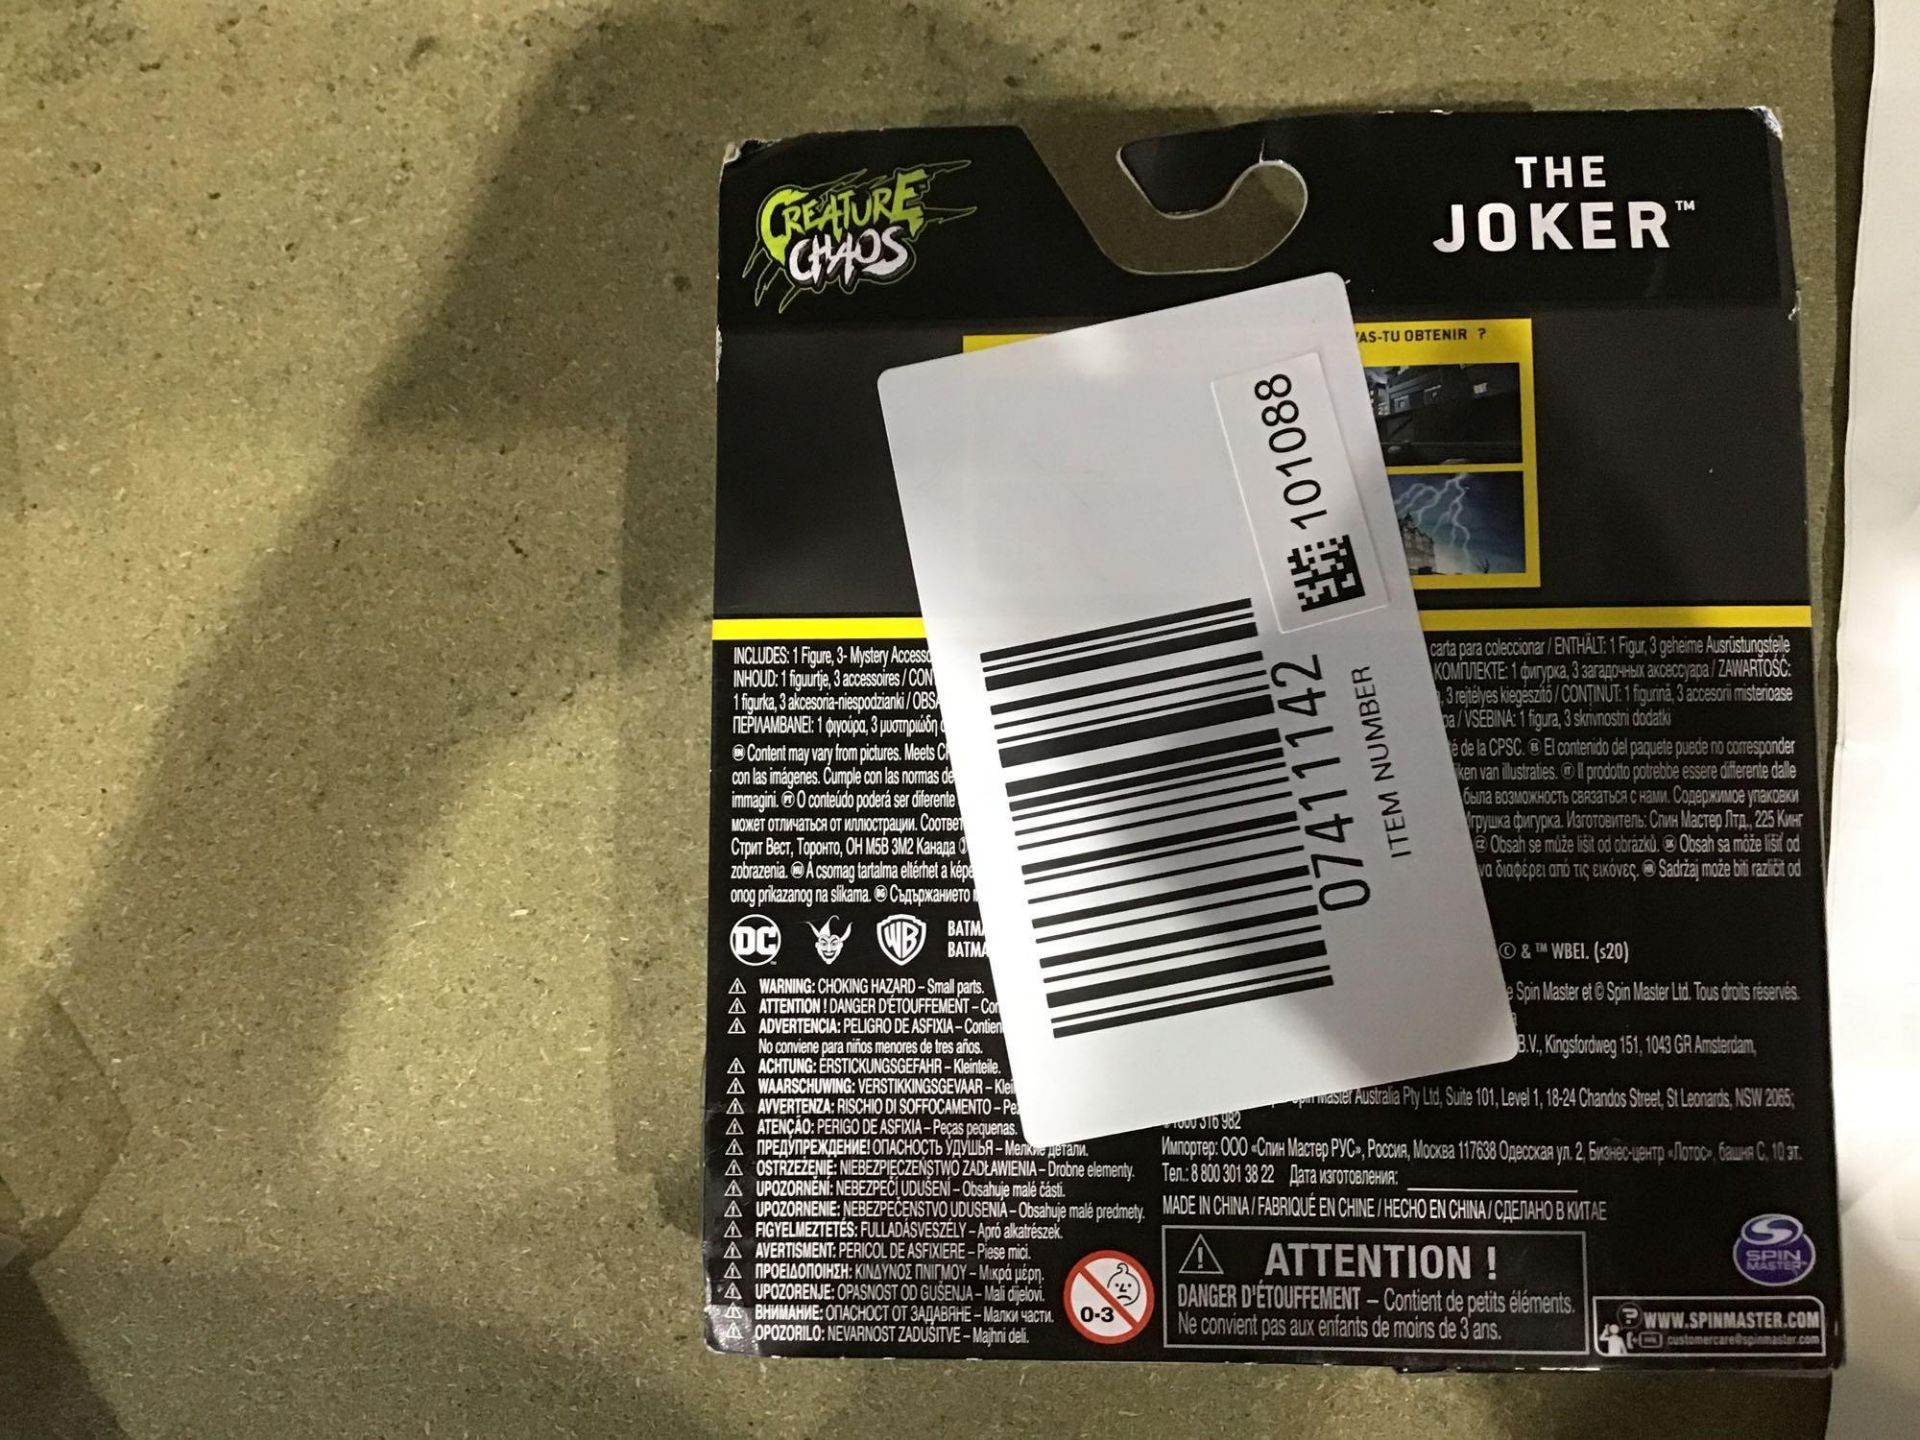 DC Batman The Joker Action Figure with 3 Mystery Accessories - Image 3 of 4